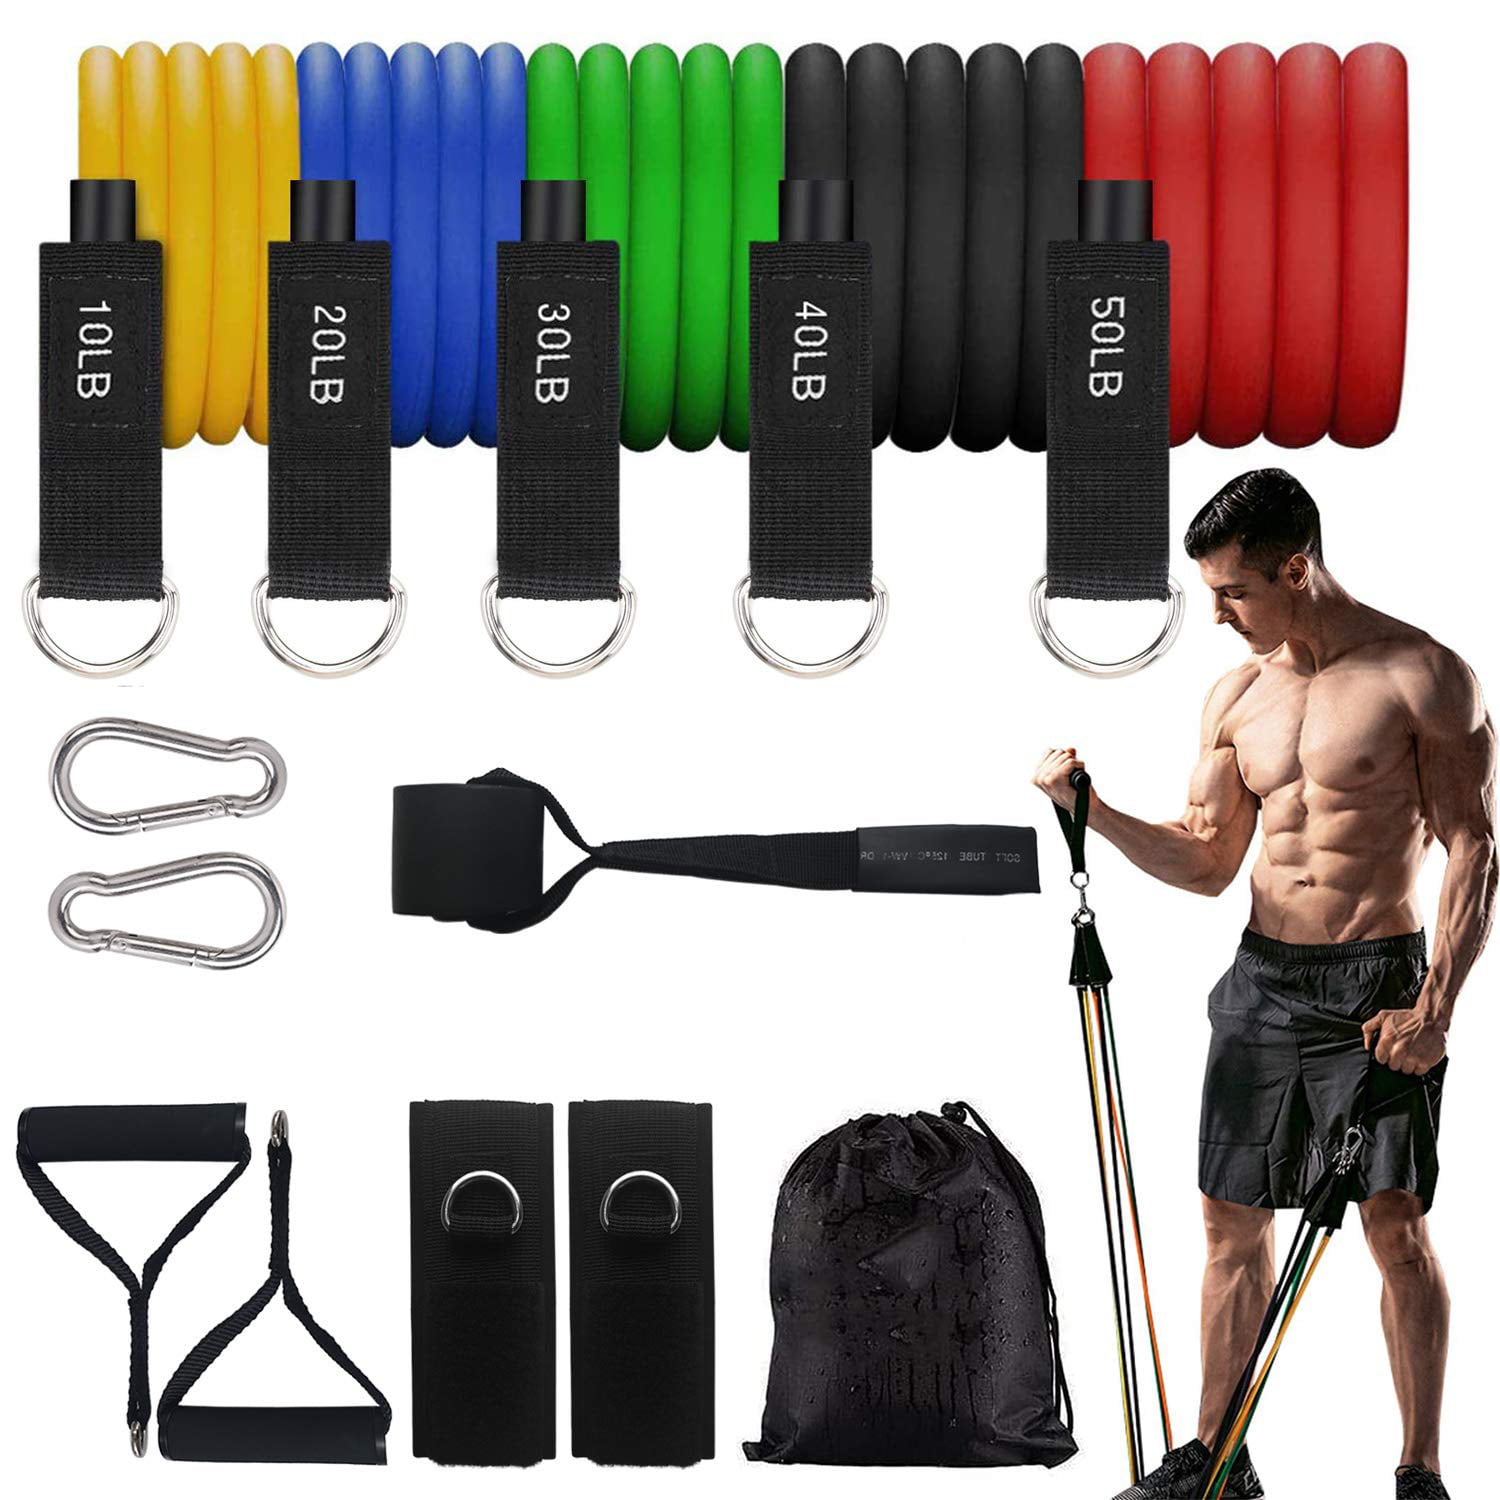 Polly House Resistance Bands Set 11 pcs Exercise Bands Yoga Pull Rope Fitness Training Tubes Handles Ankle Straps Resistance Home Workout Stackable up to 150 lbs